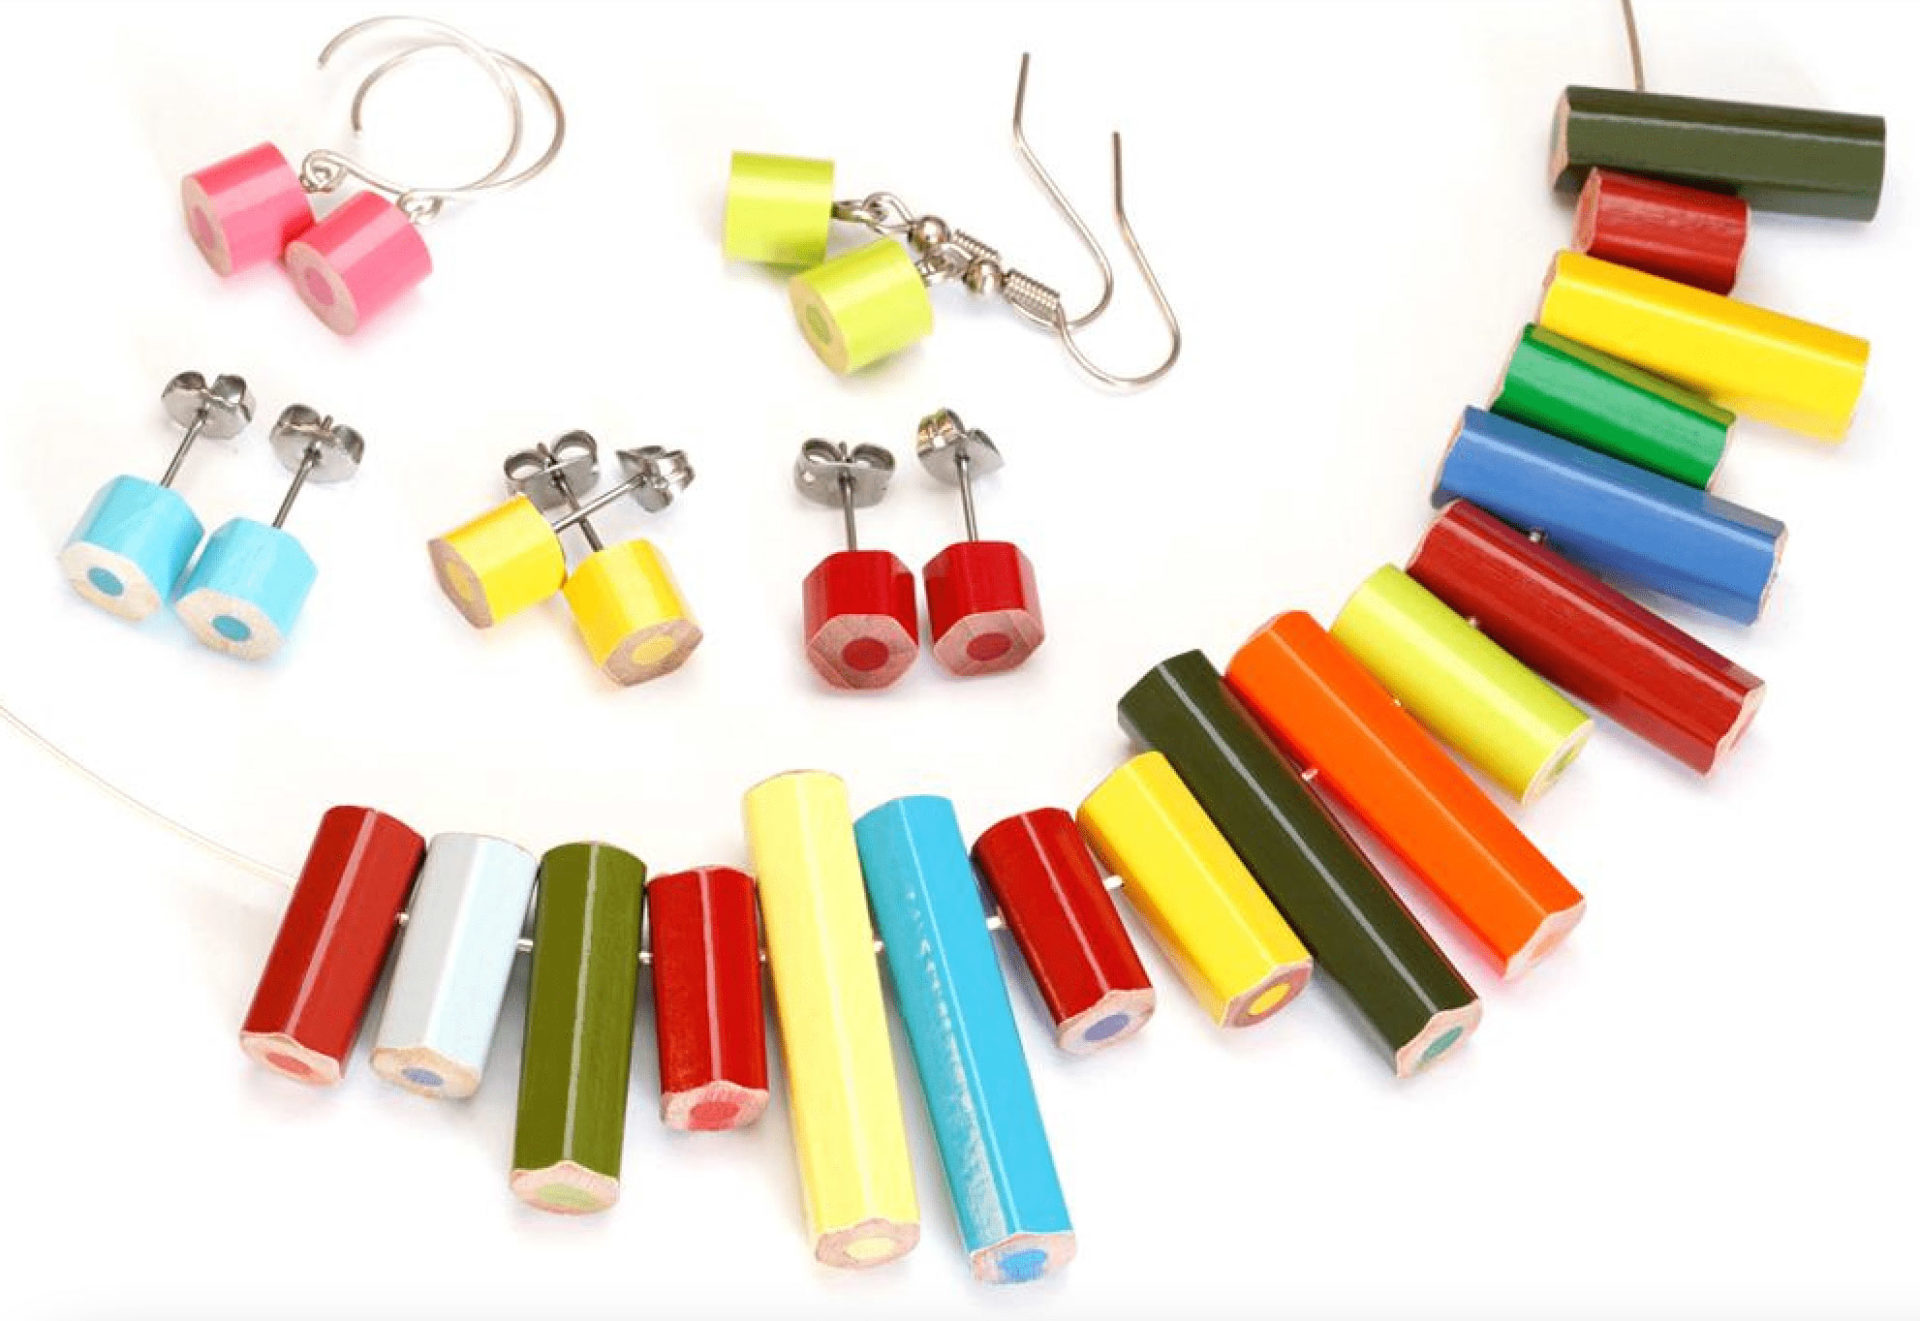 Two dangle earrings, three stud earrings, and a necklace sit on a white background. Each is made with a variety of colored pencil pieces that are red, white, green, yellow, and blue.